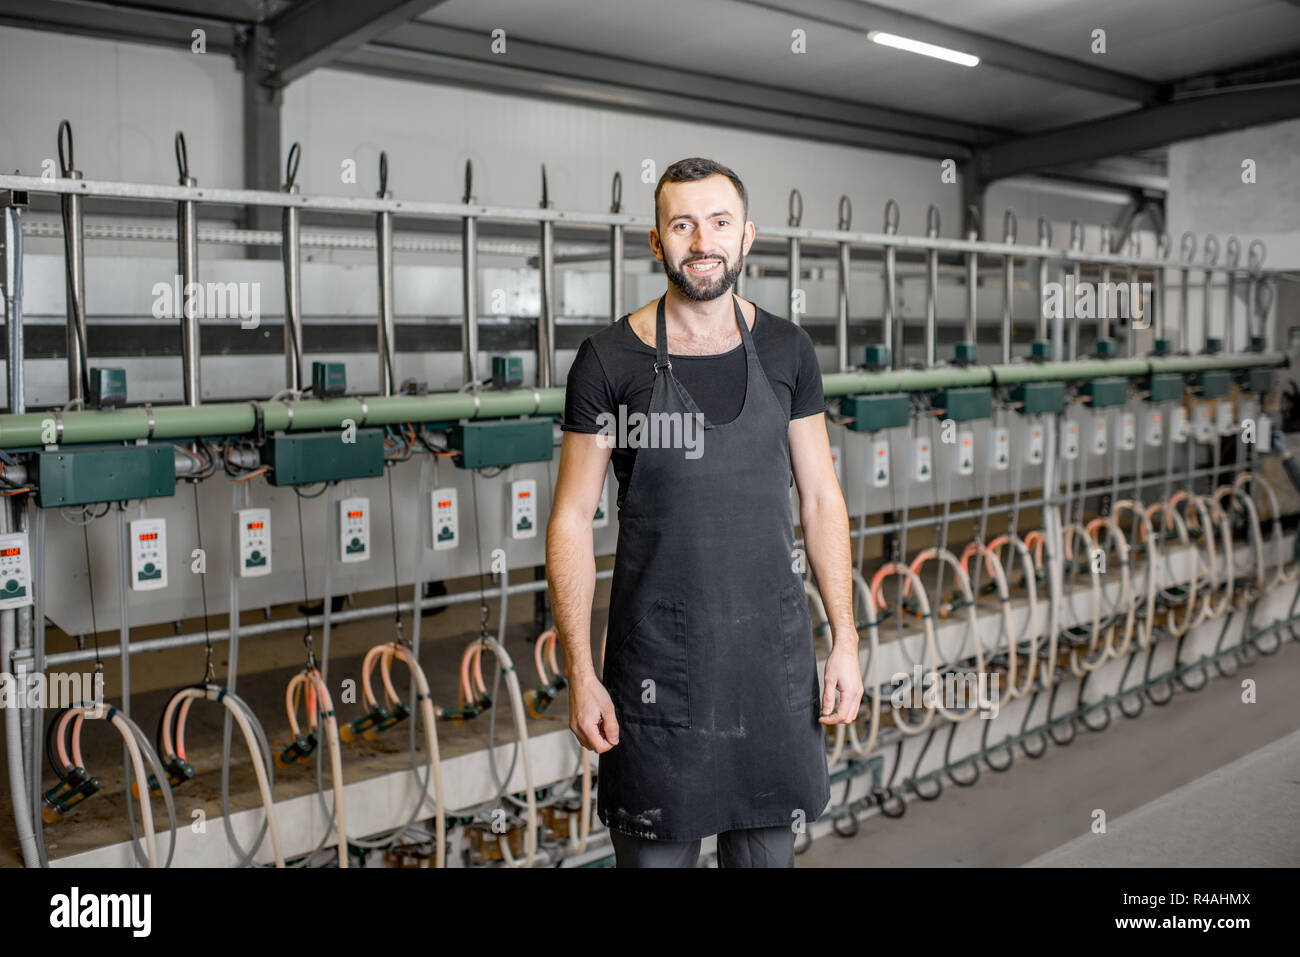 Portrait of a male worker in black uniform standing at the goat farm with milking line on the background Stock Photo